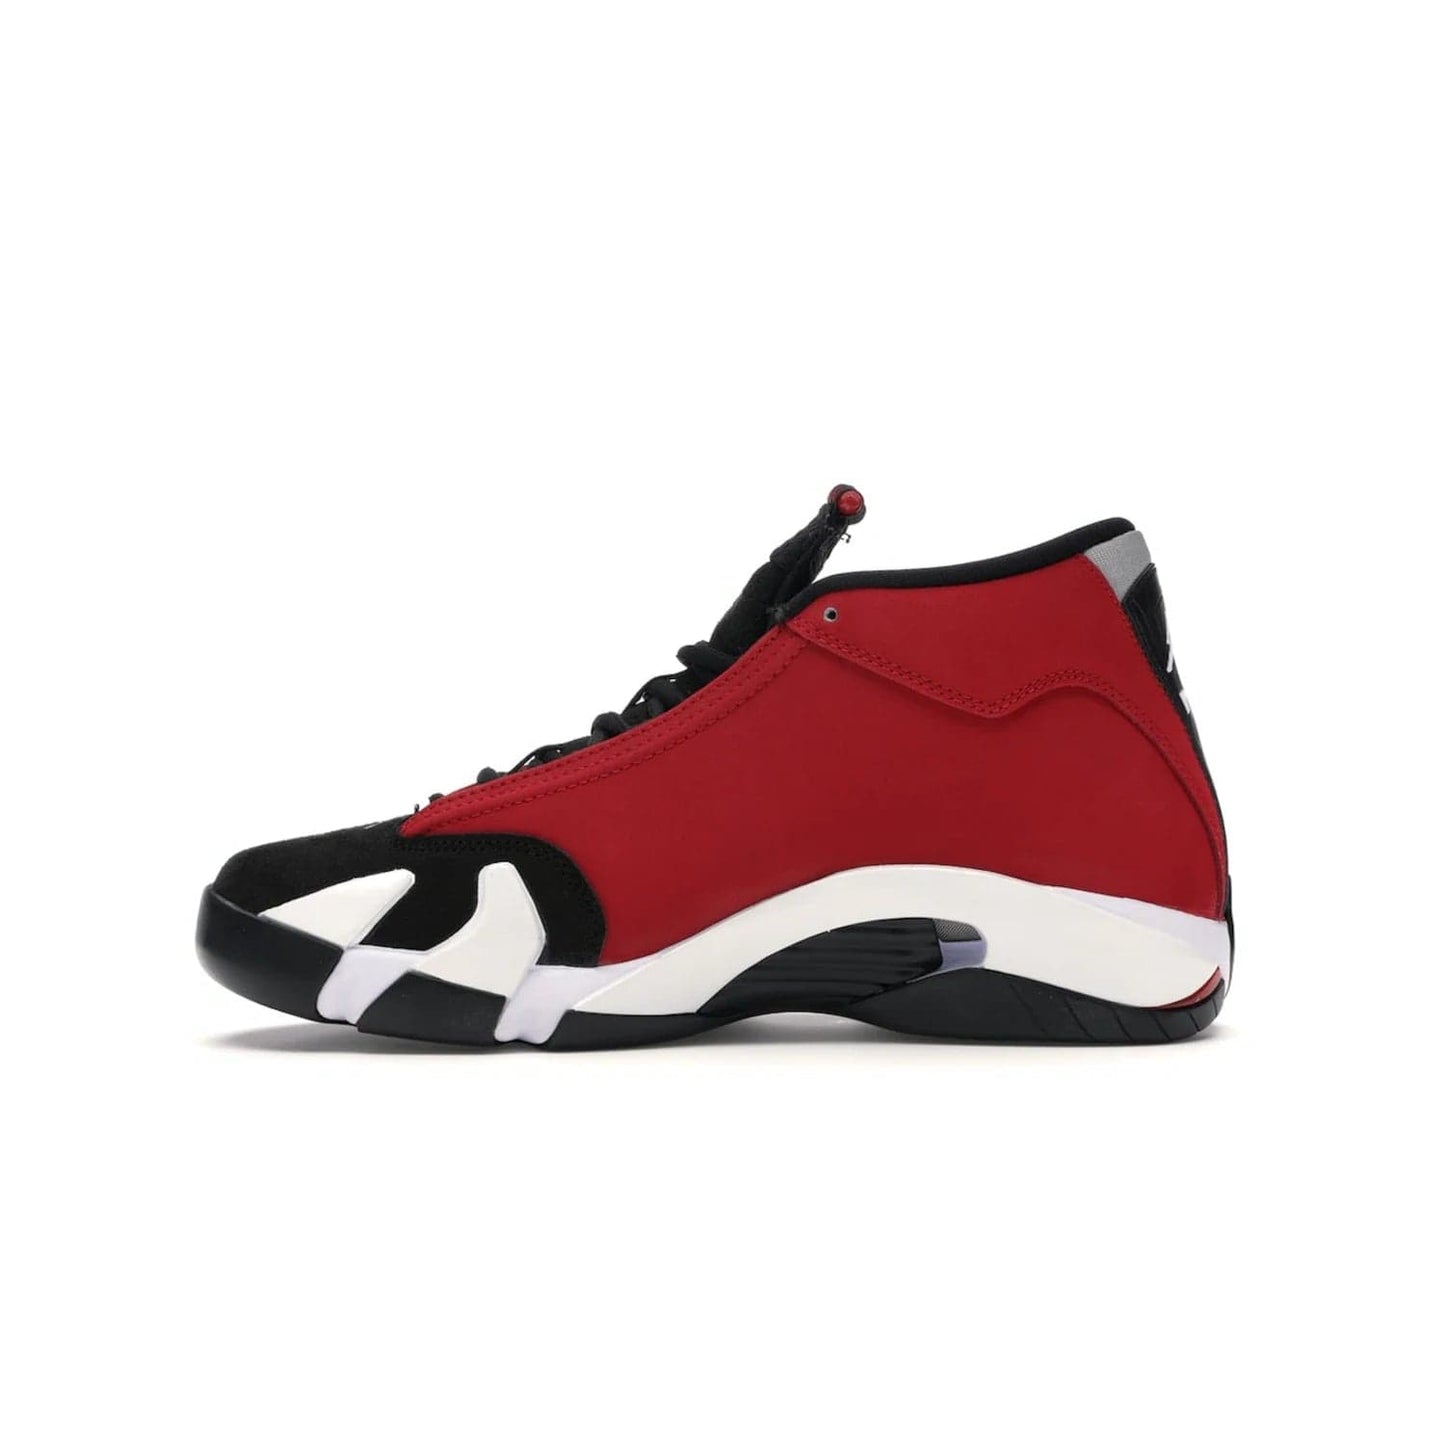 Jordan 14 Retro Gym Red Toro - Image 19 - Only at www.BallersClubKickz.com - Feel the Chicago Bulls energy with the Jordan 14 Retro Gym Red Toro! Black, red, and white design unites performance and fashion. Get your hands on this limited edition Jordan and show off your style today.